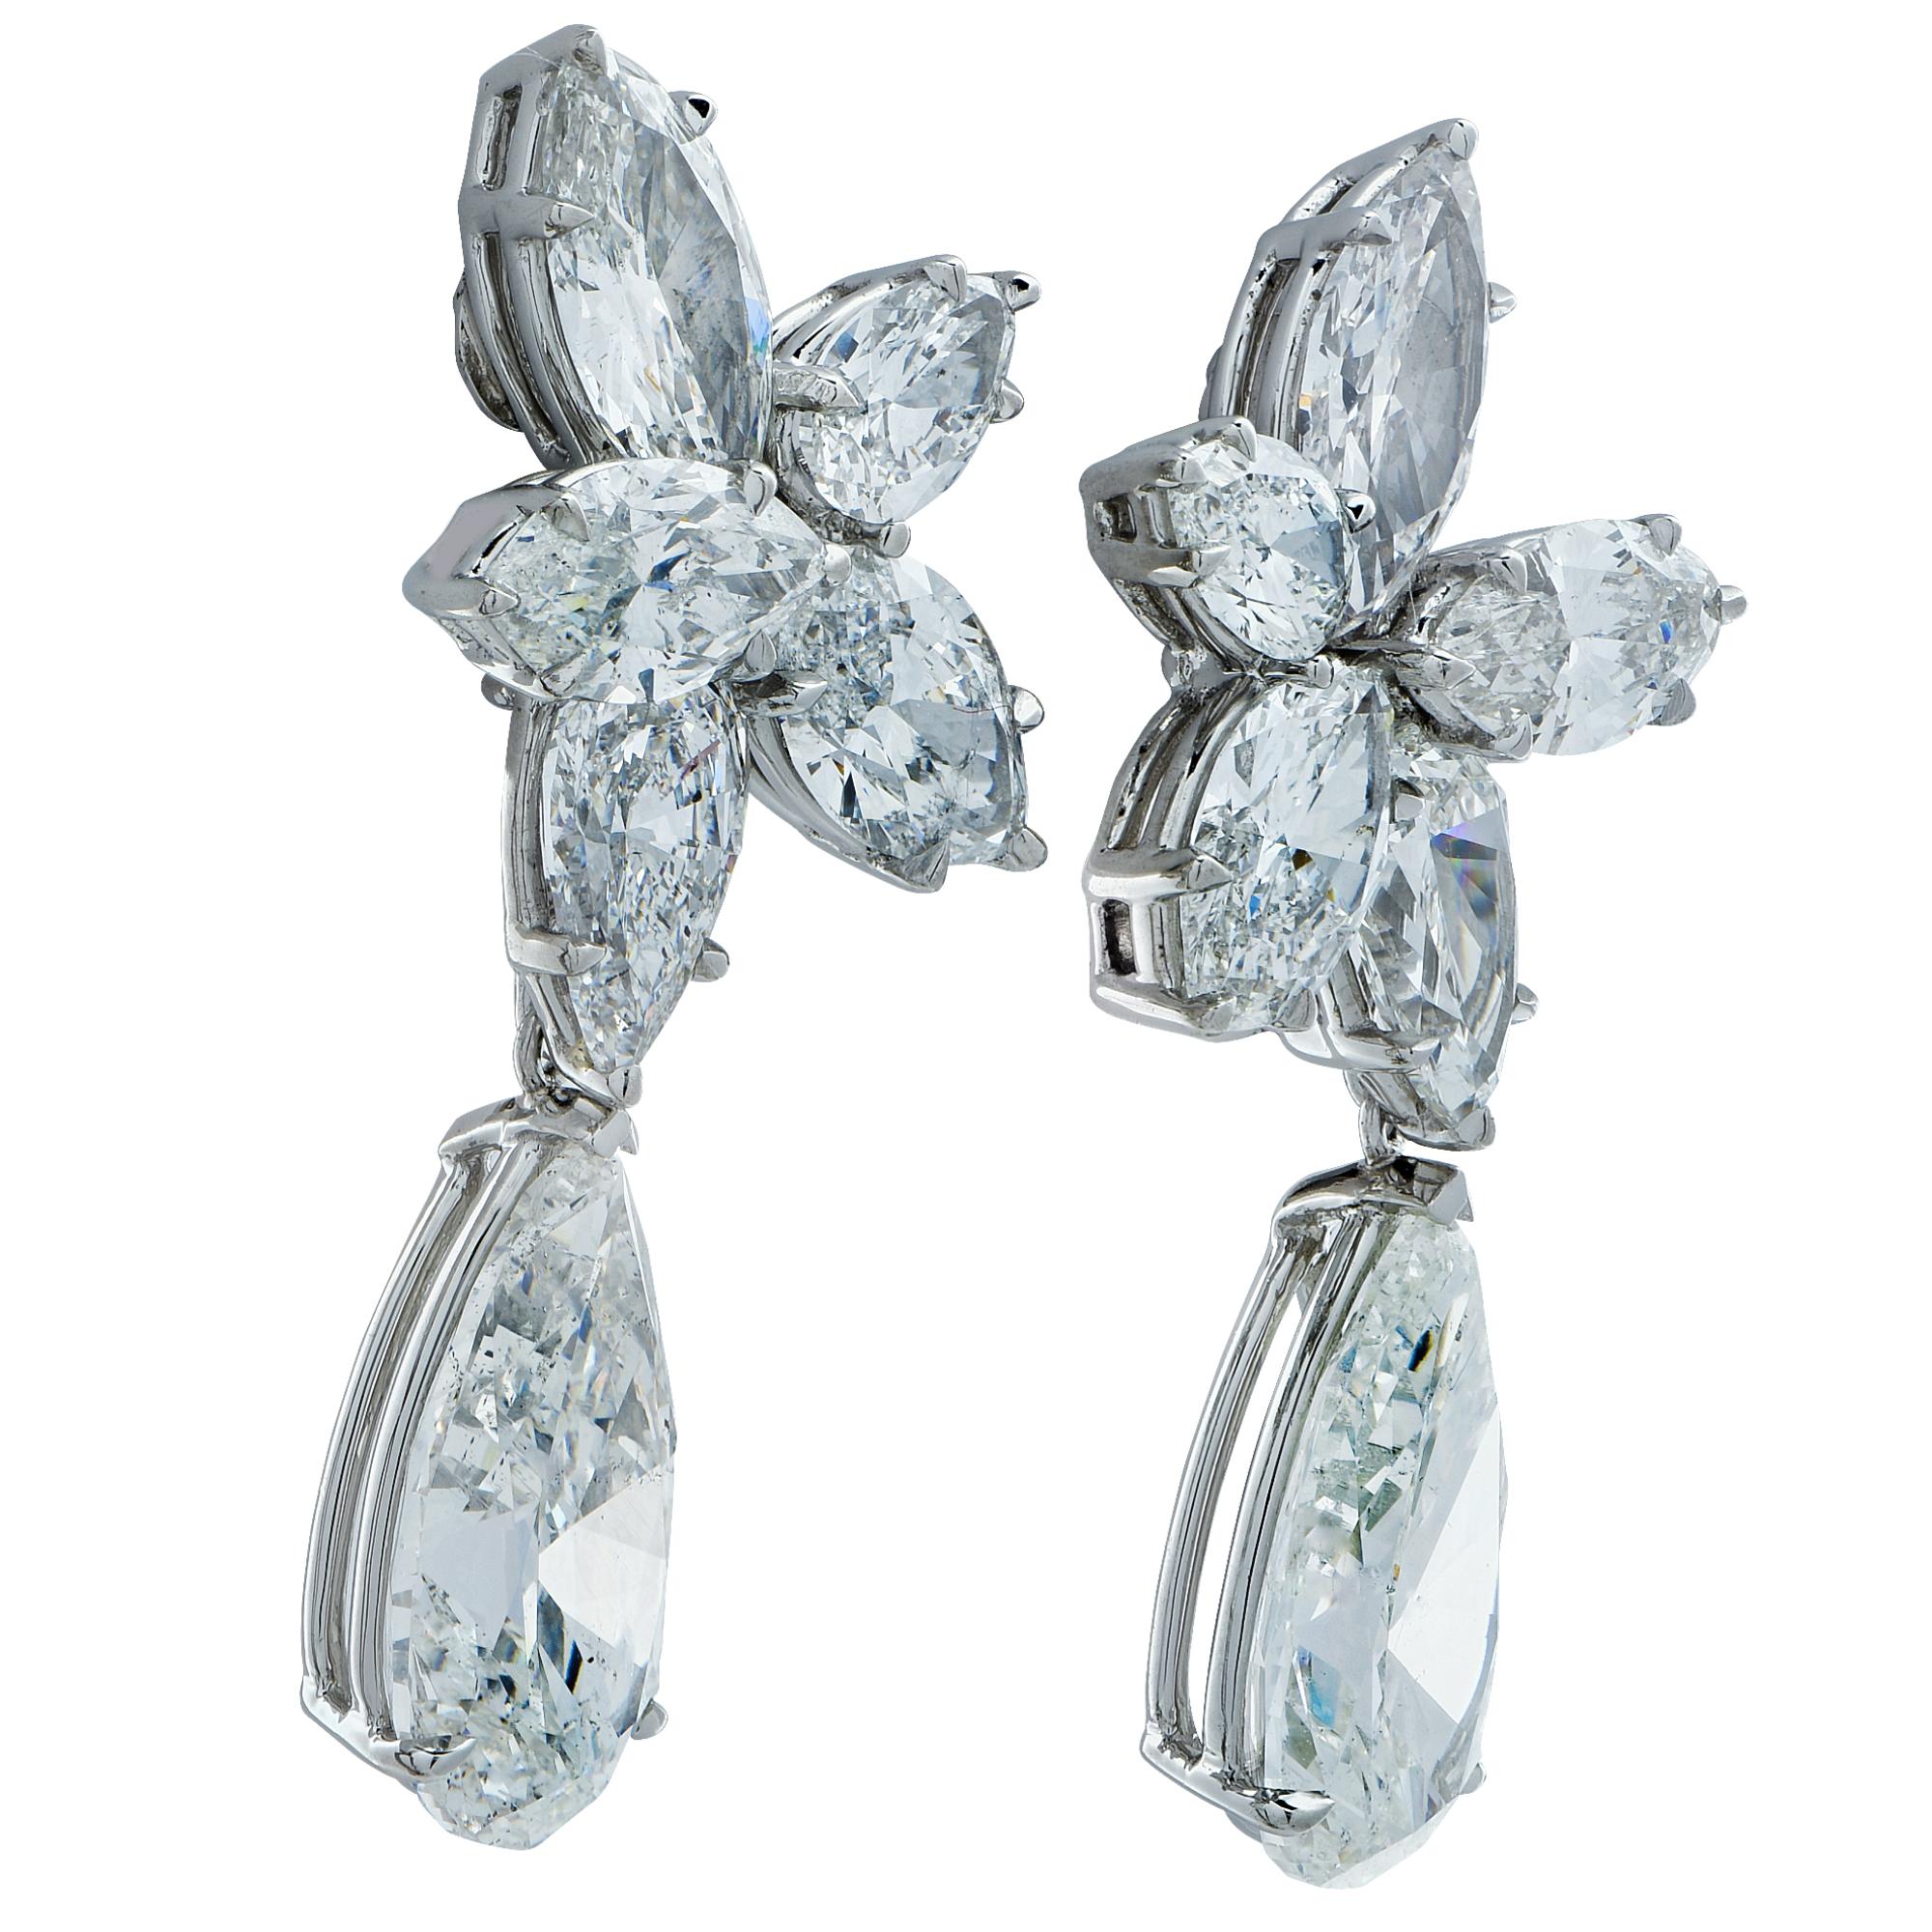 Sensational diamond day and night earrings, handmade in platinum. These magnificent dangle earrings showcase 2 matching certified pear shape diamonds weighing 5.81 carats total, G Color and SI clarity, suspended from a dazzling cluster of 10 mixed